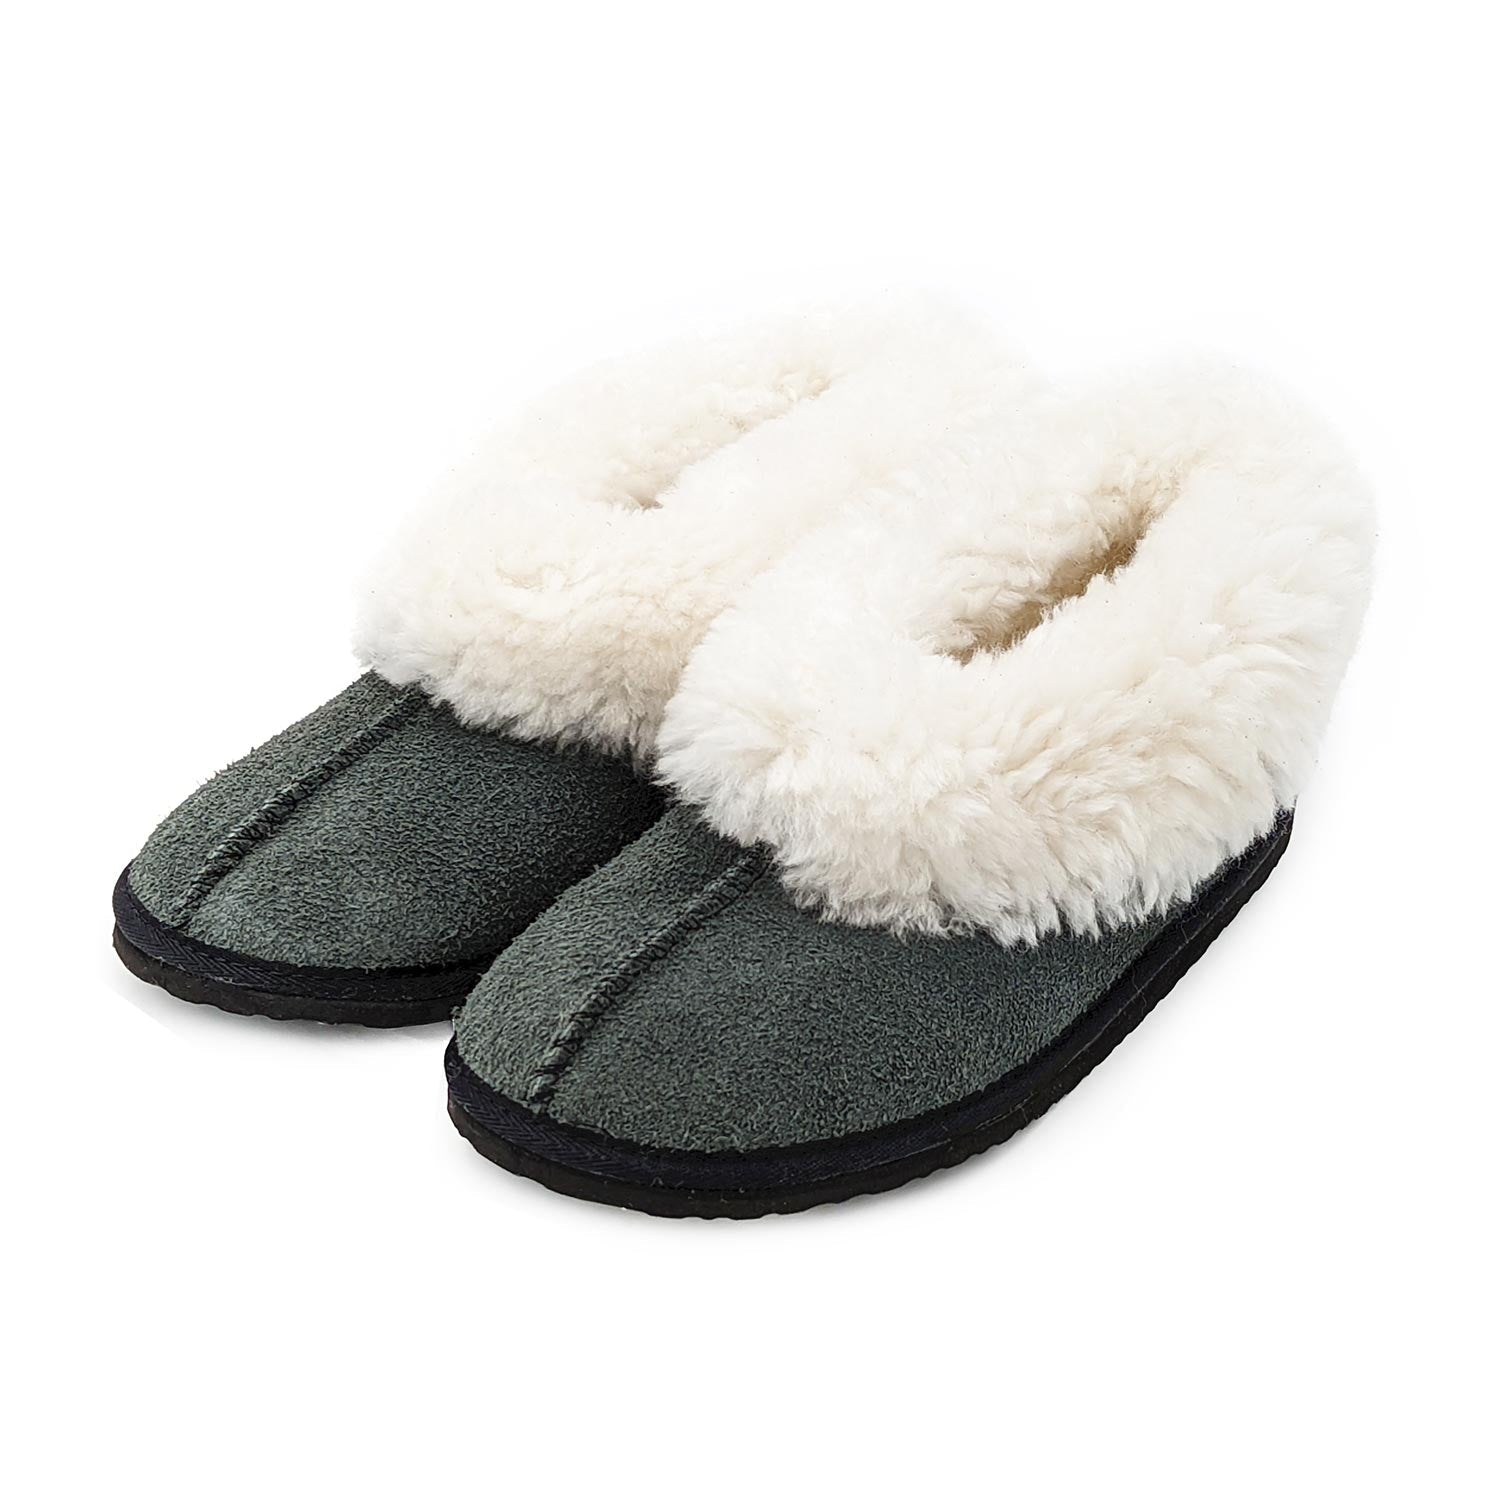 Karu Cosy Charcoal Sheepskin & Wool Slippers | Made by Artisans ...